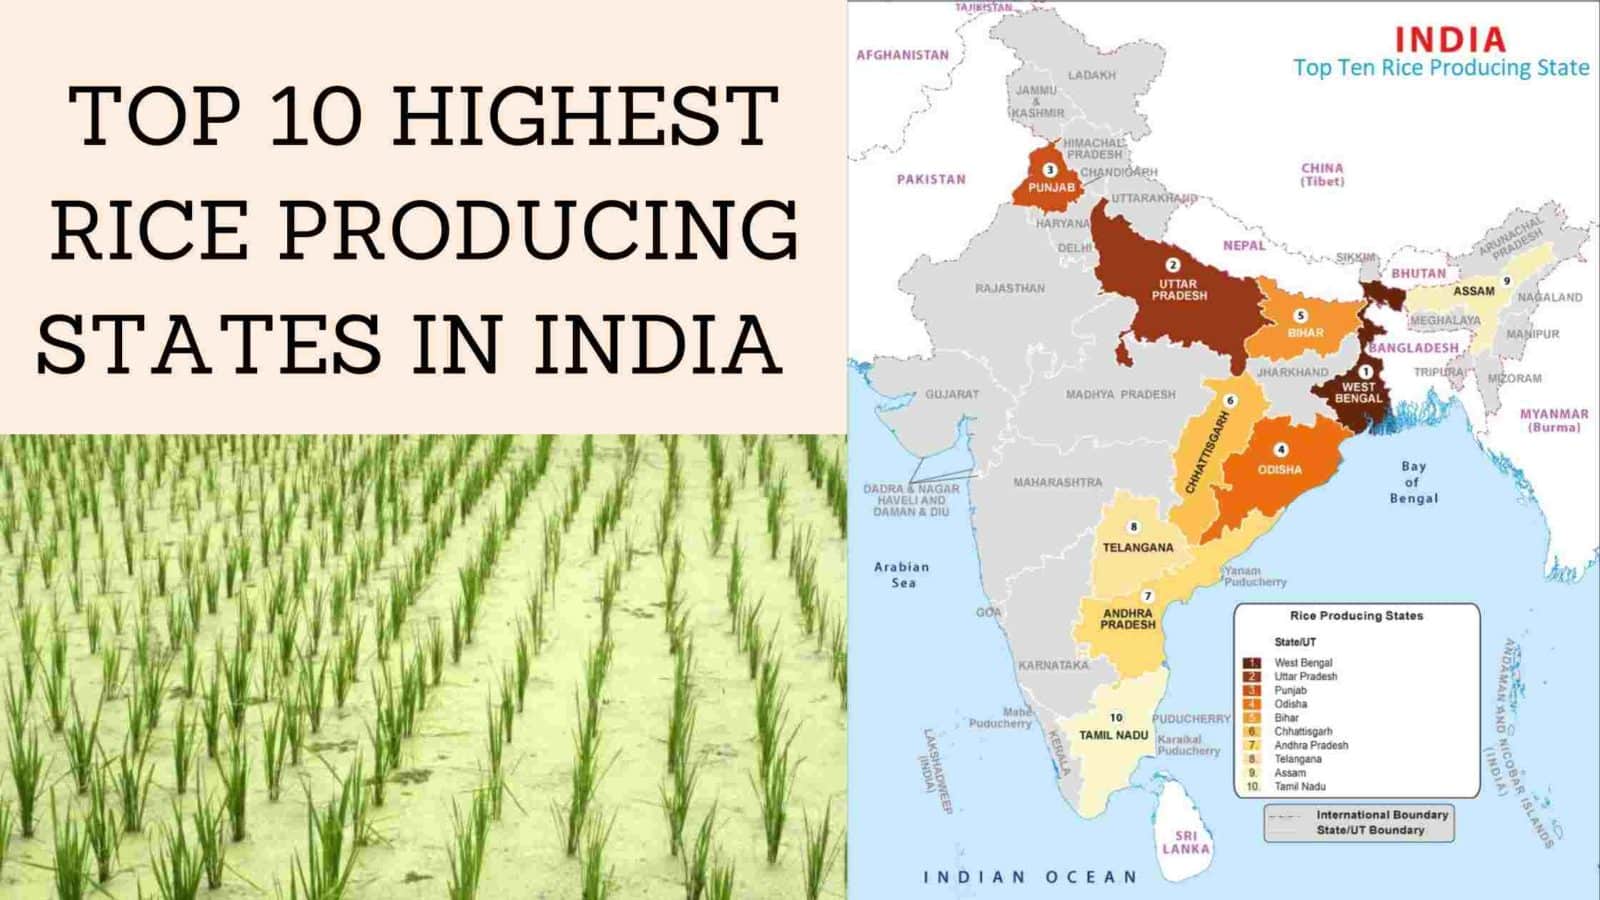 TOP-10-HIGHEST-RICE-PRODUCING-STATES-IN-INDIA-.jpg